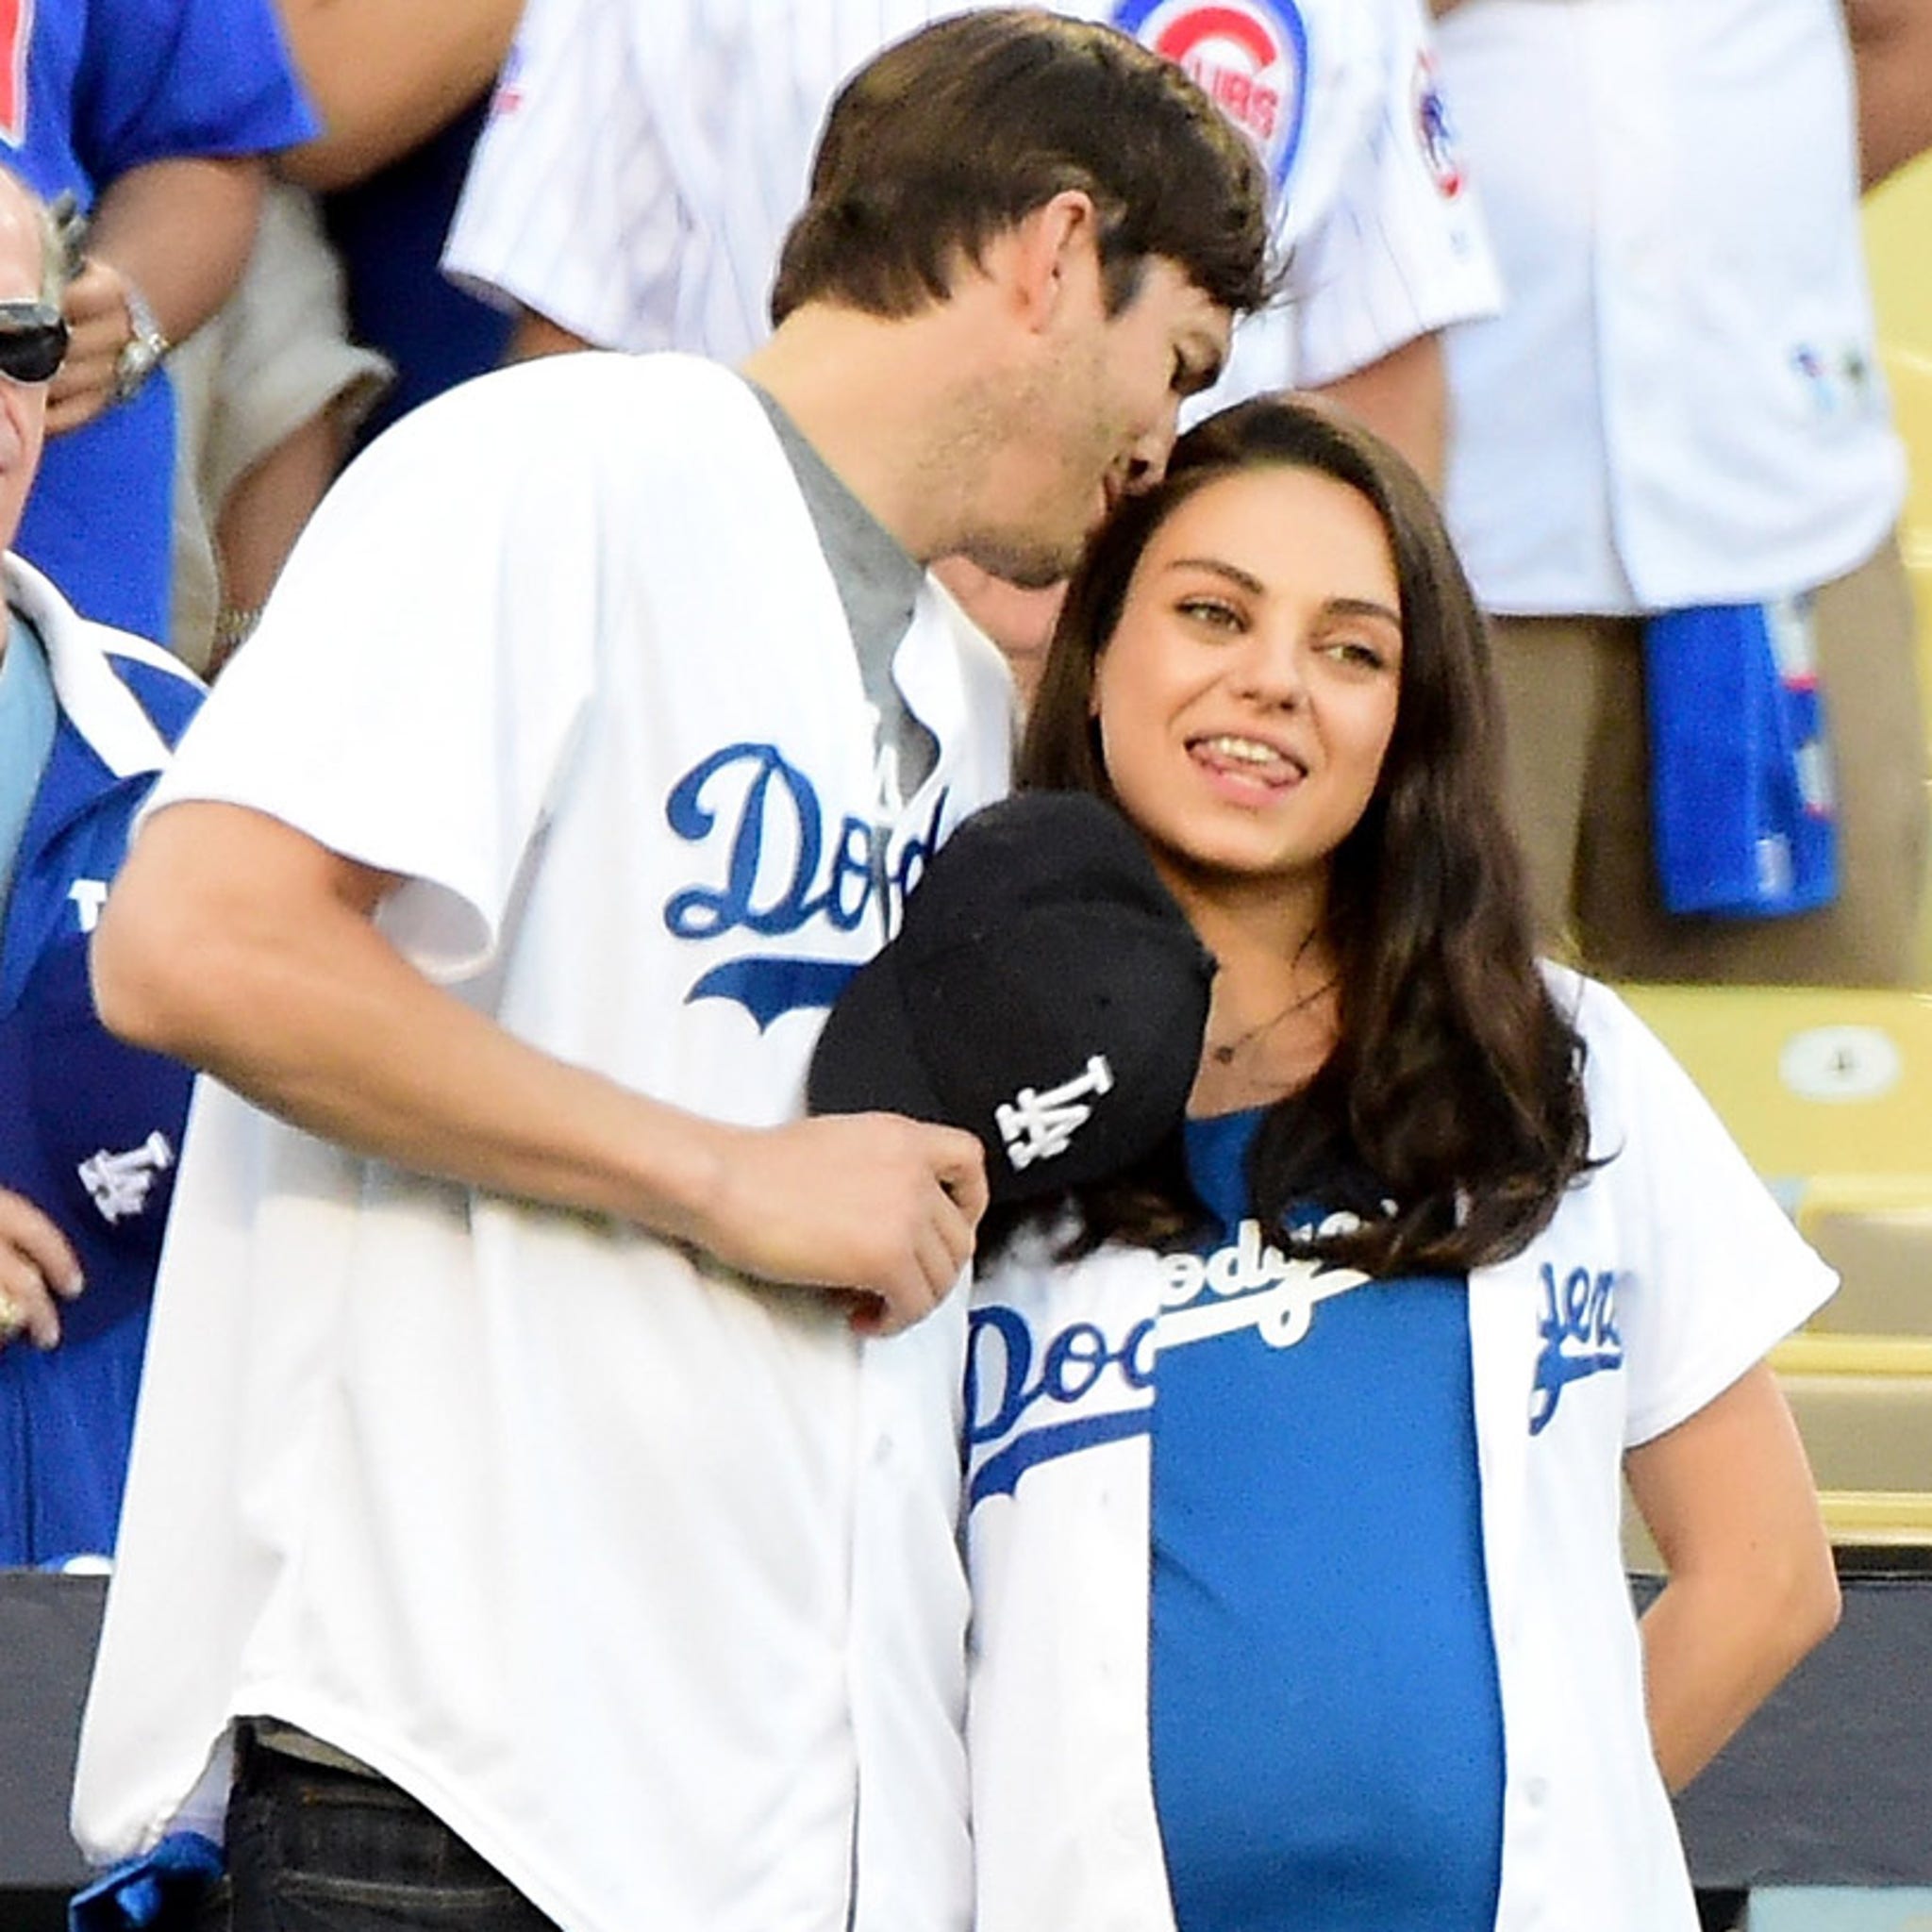 Pregnant Mila Kunis Brings Huge Baby Bump to Dodgers Game with Fiance  Ashton Kutcher: Photo 3168909, Ashton Kutcher, Mila Kunis, Pregnant  Celebrities Photos